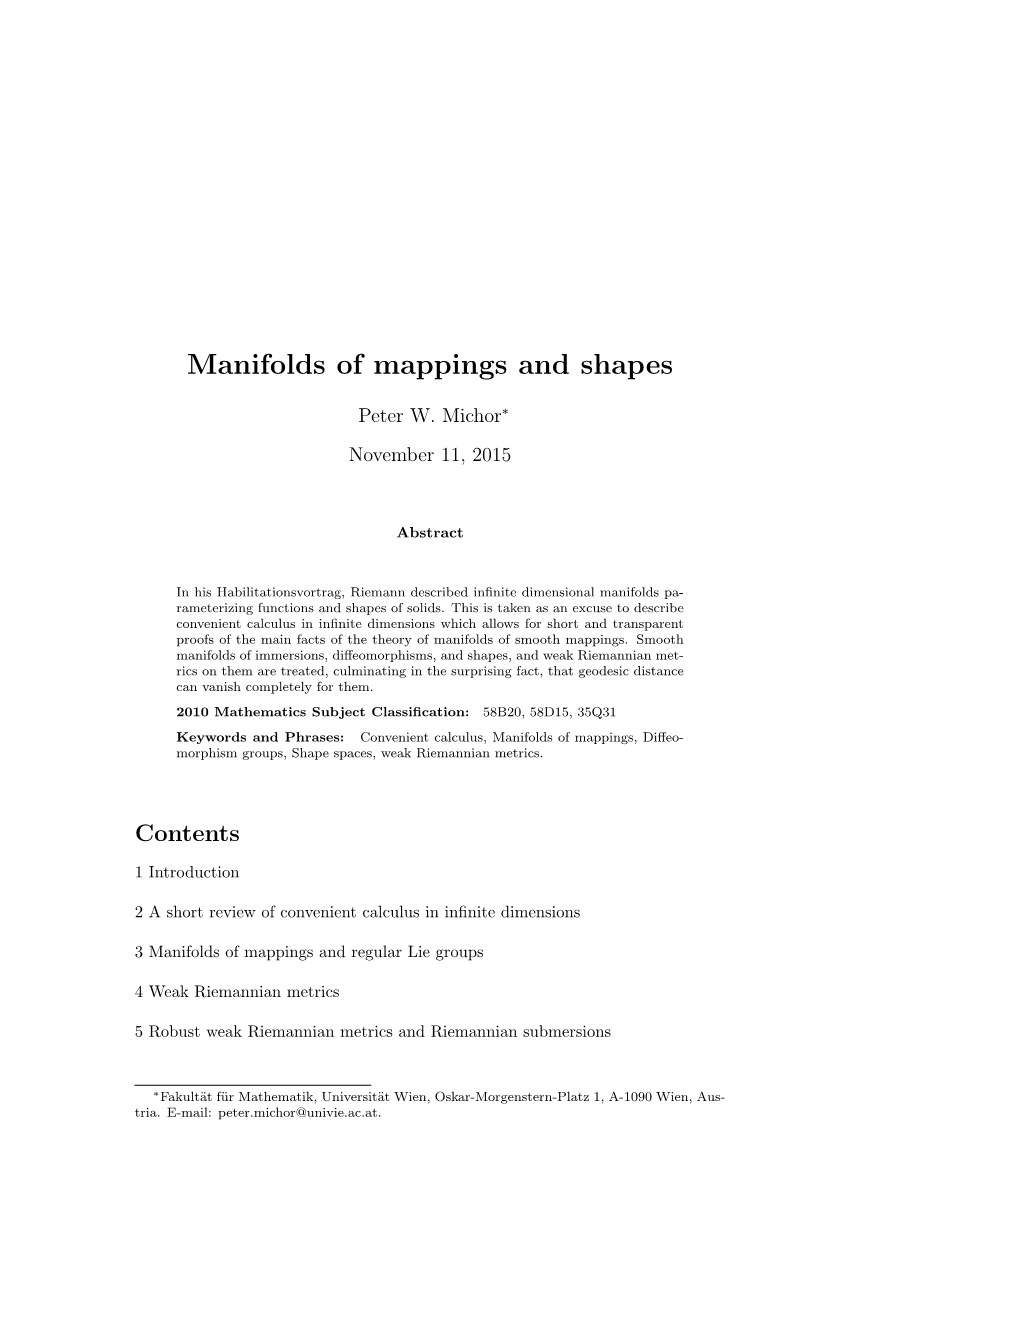 Manifolds of Mappings and Shapes